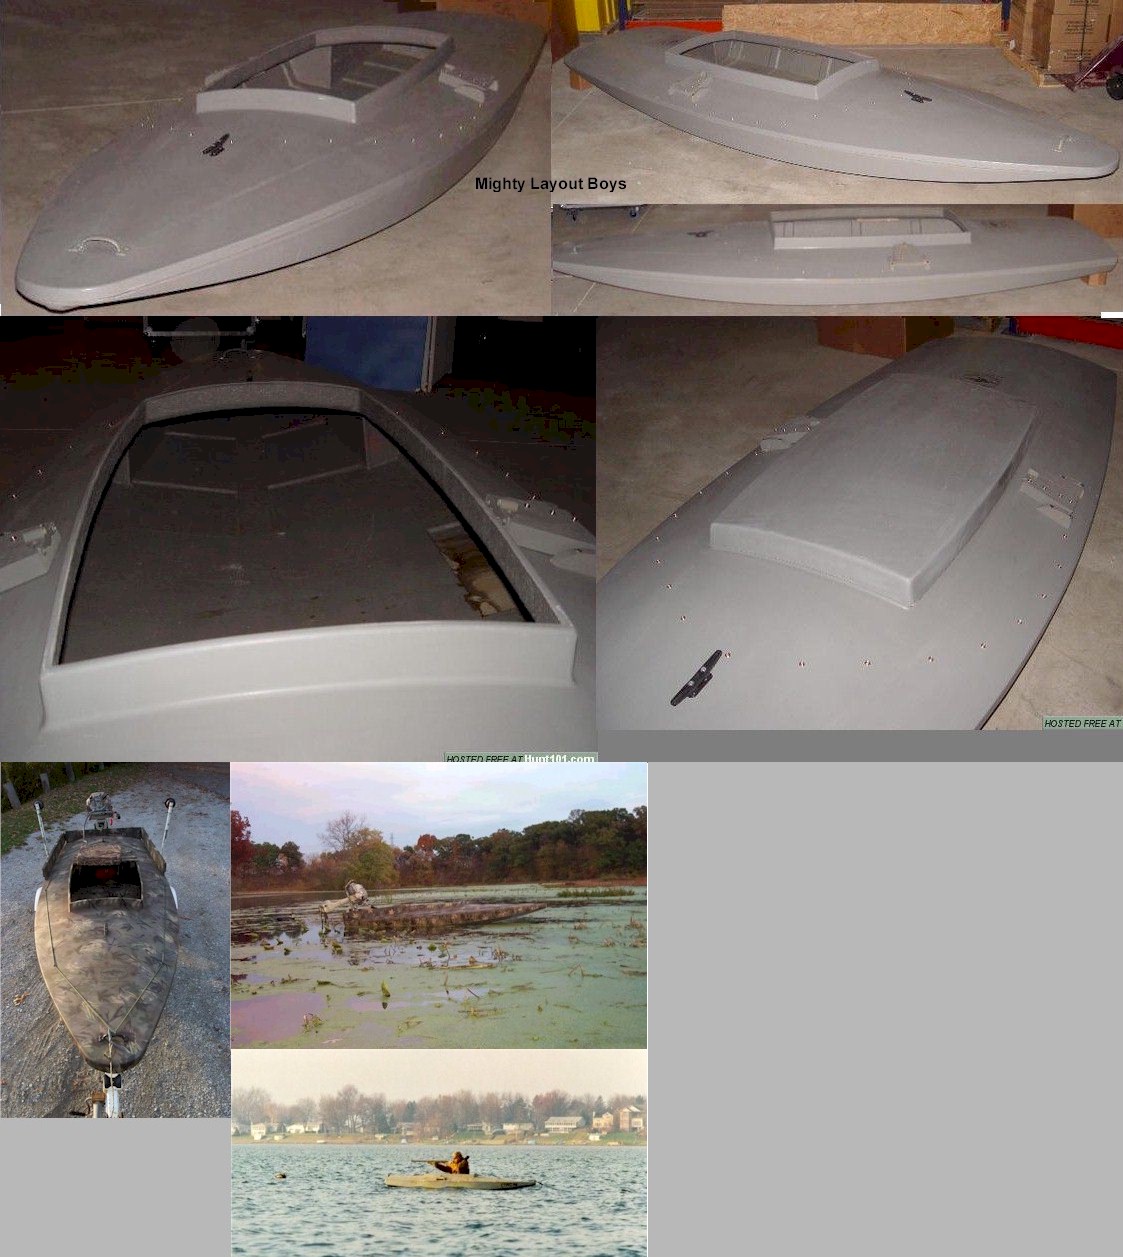  .net/forums/boat-building/iam-looking-plans-layout-boat-12663.html